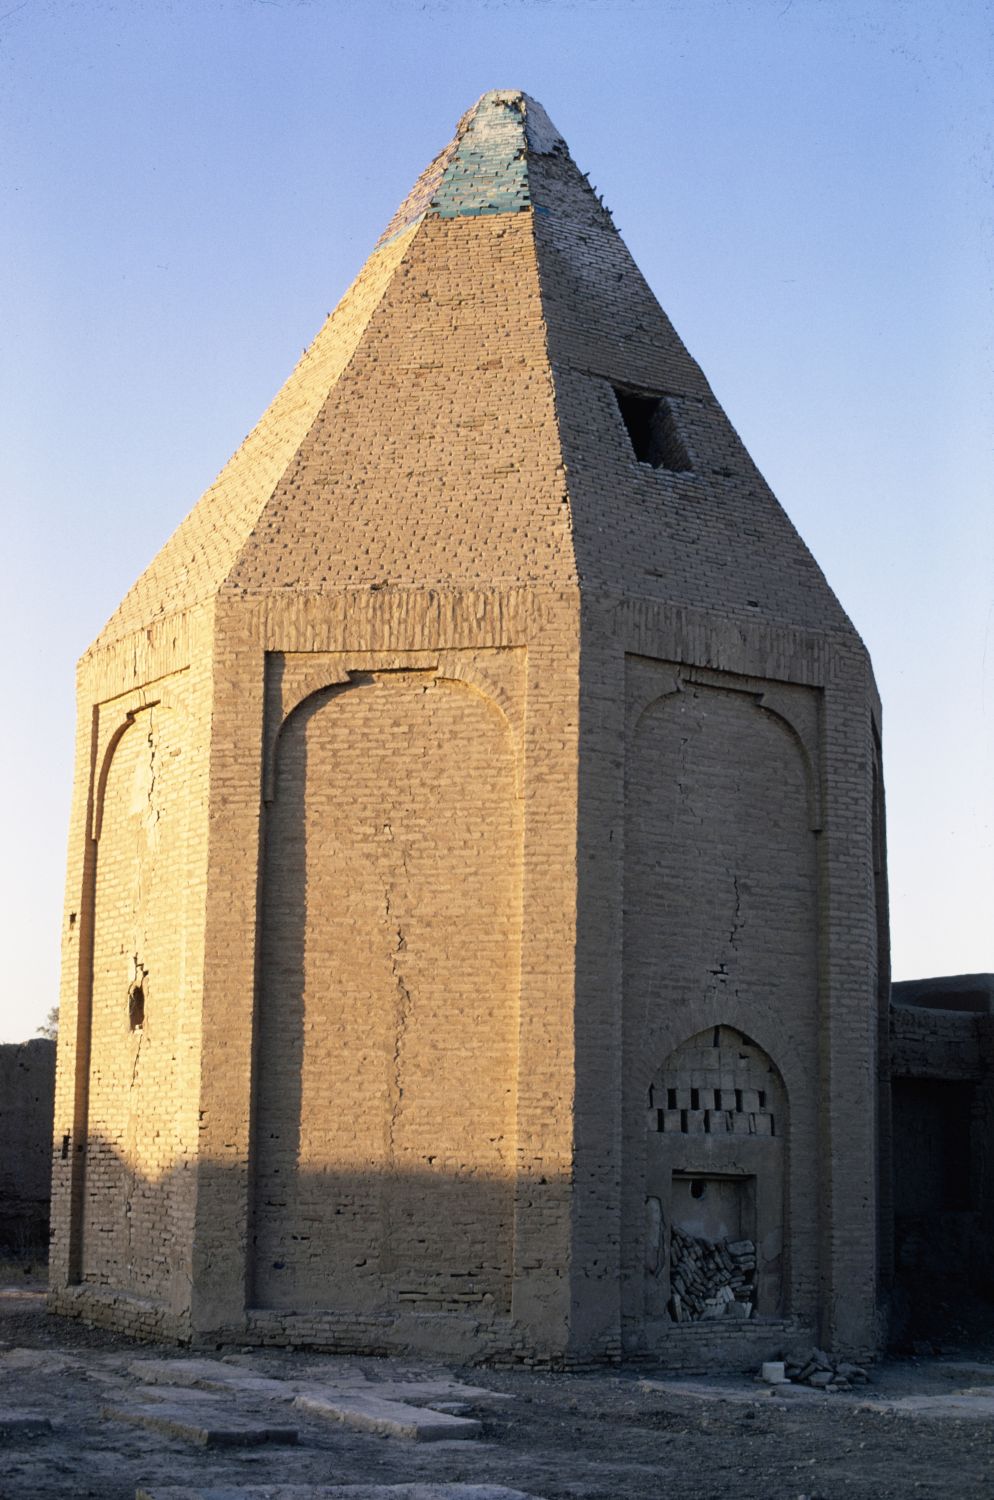 Exterior view of tomb tower.